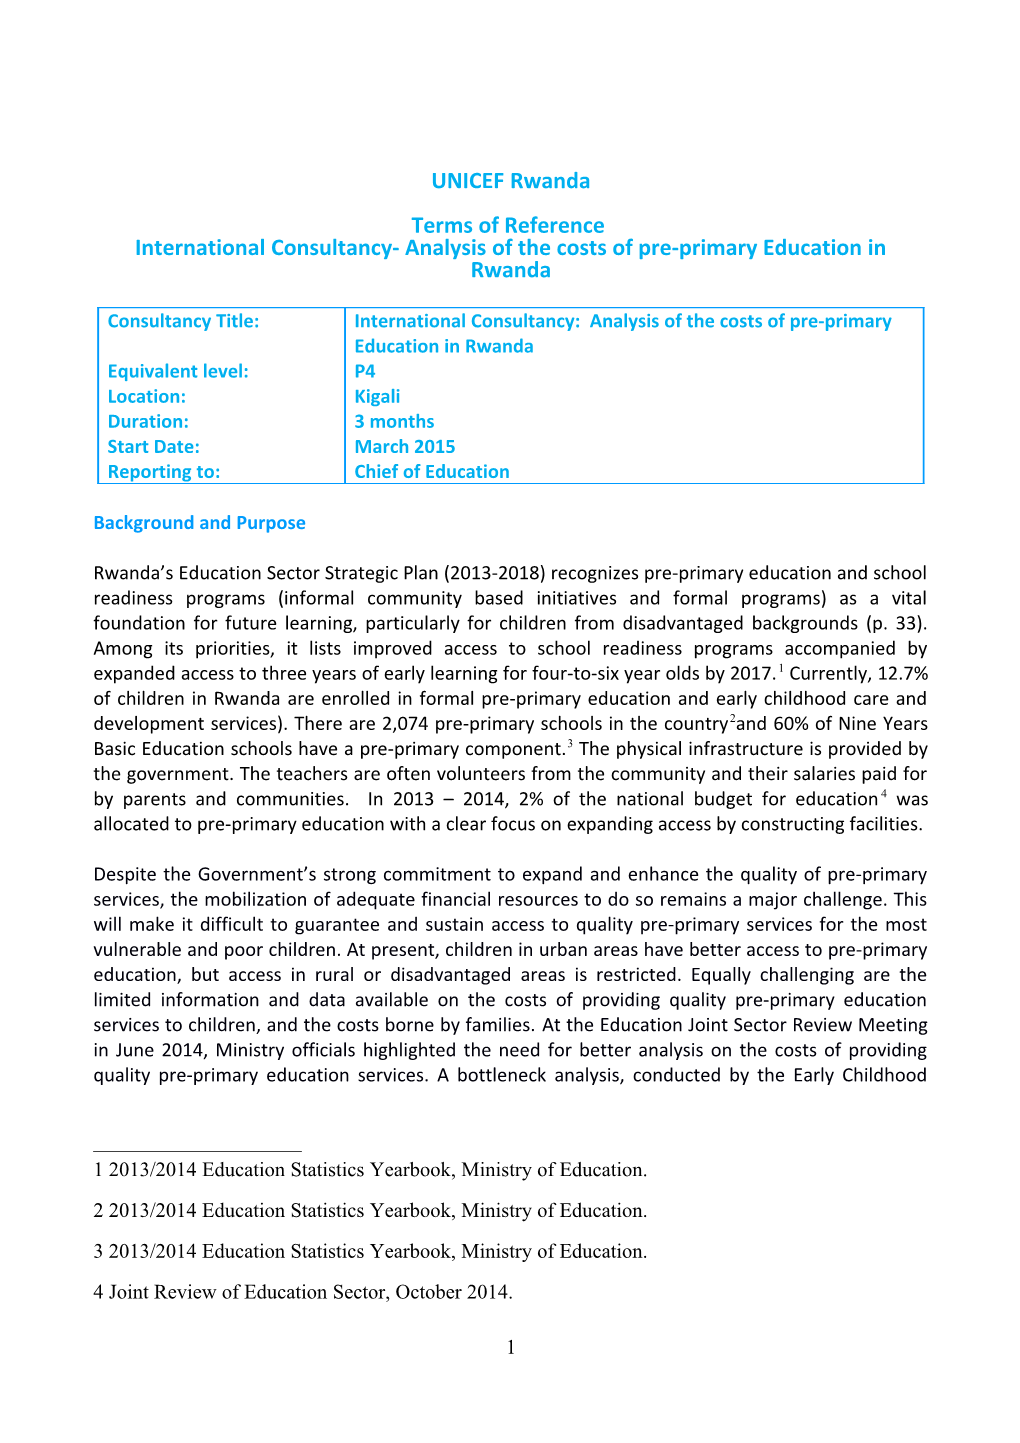 International Consultancy- Analysis of the Costs of Pre-Primary Education in Rwanda